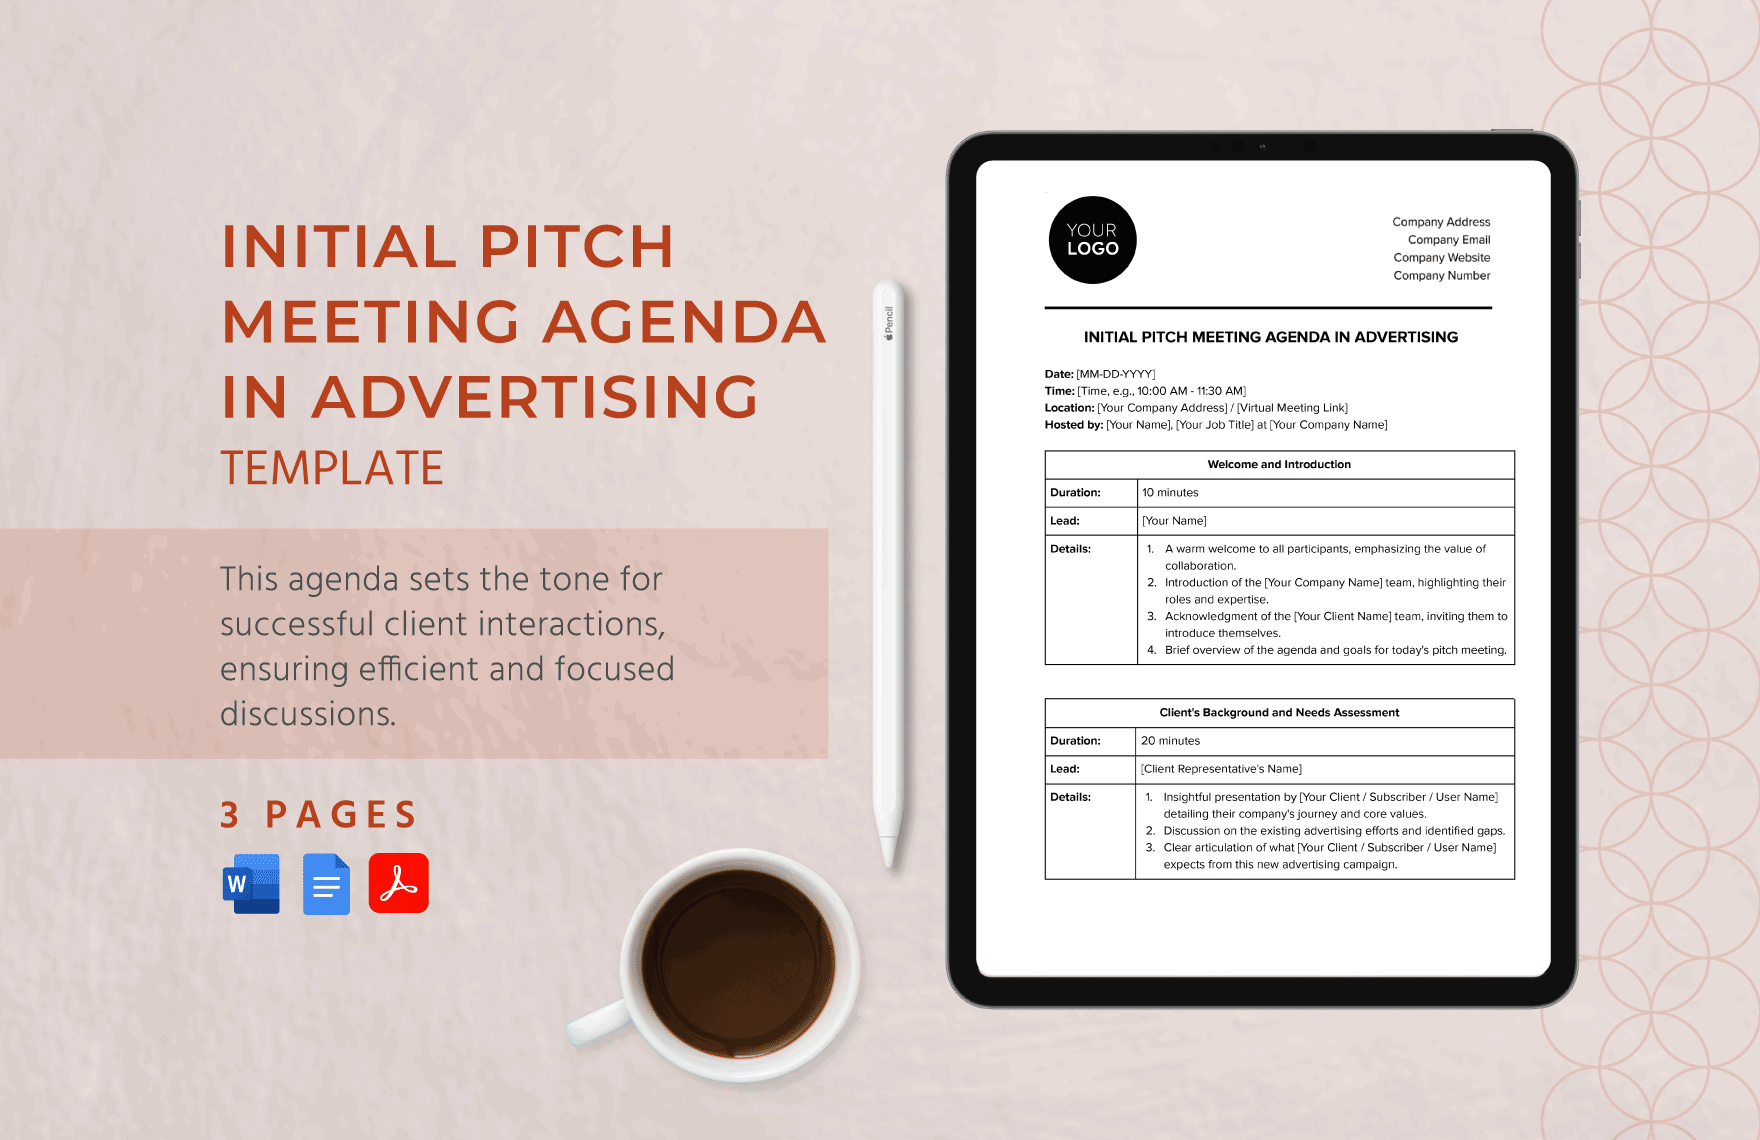 Initial Pitch Meeting Agenda in Advertising Template